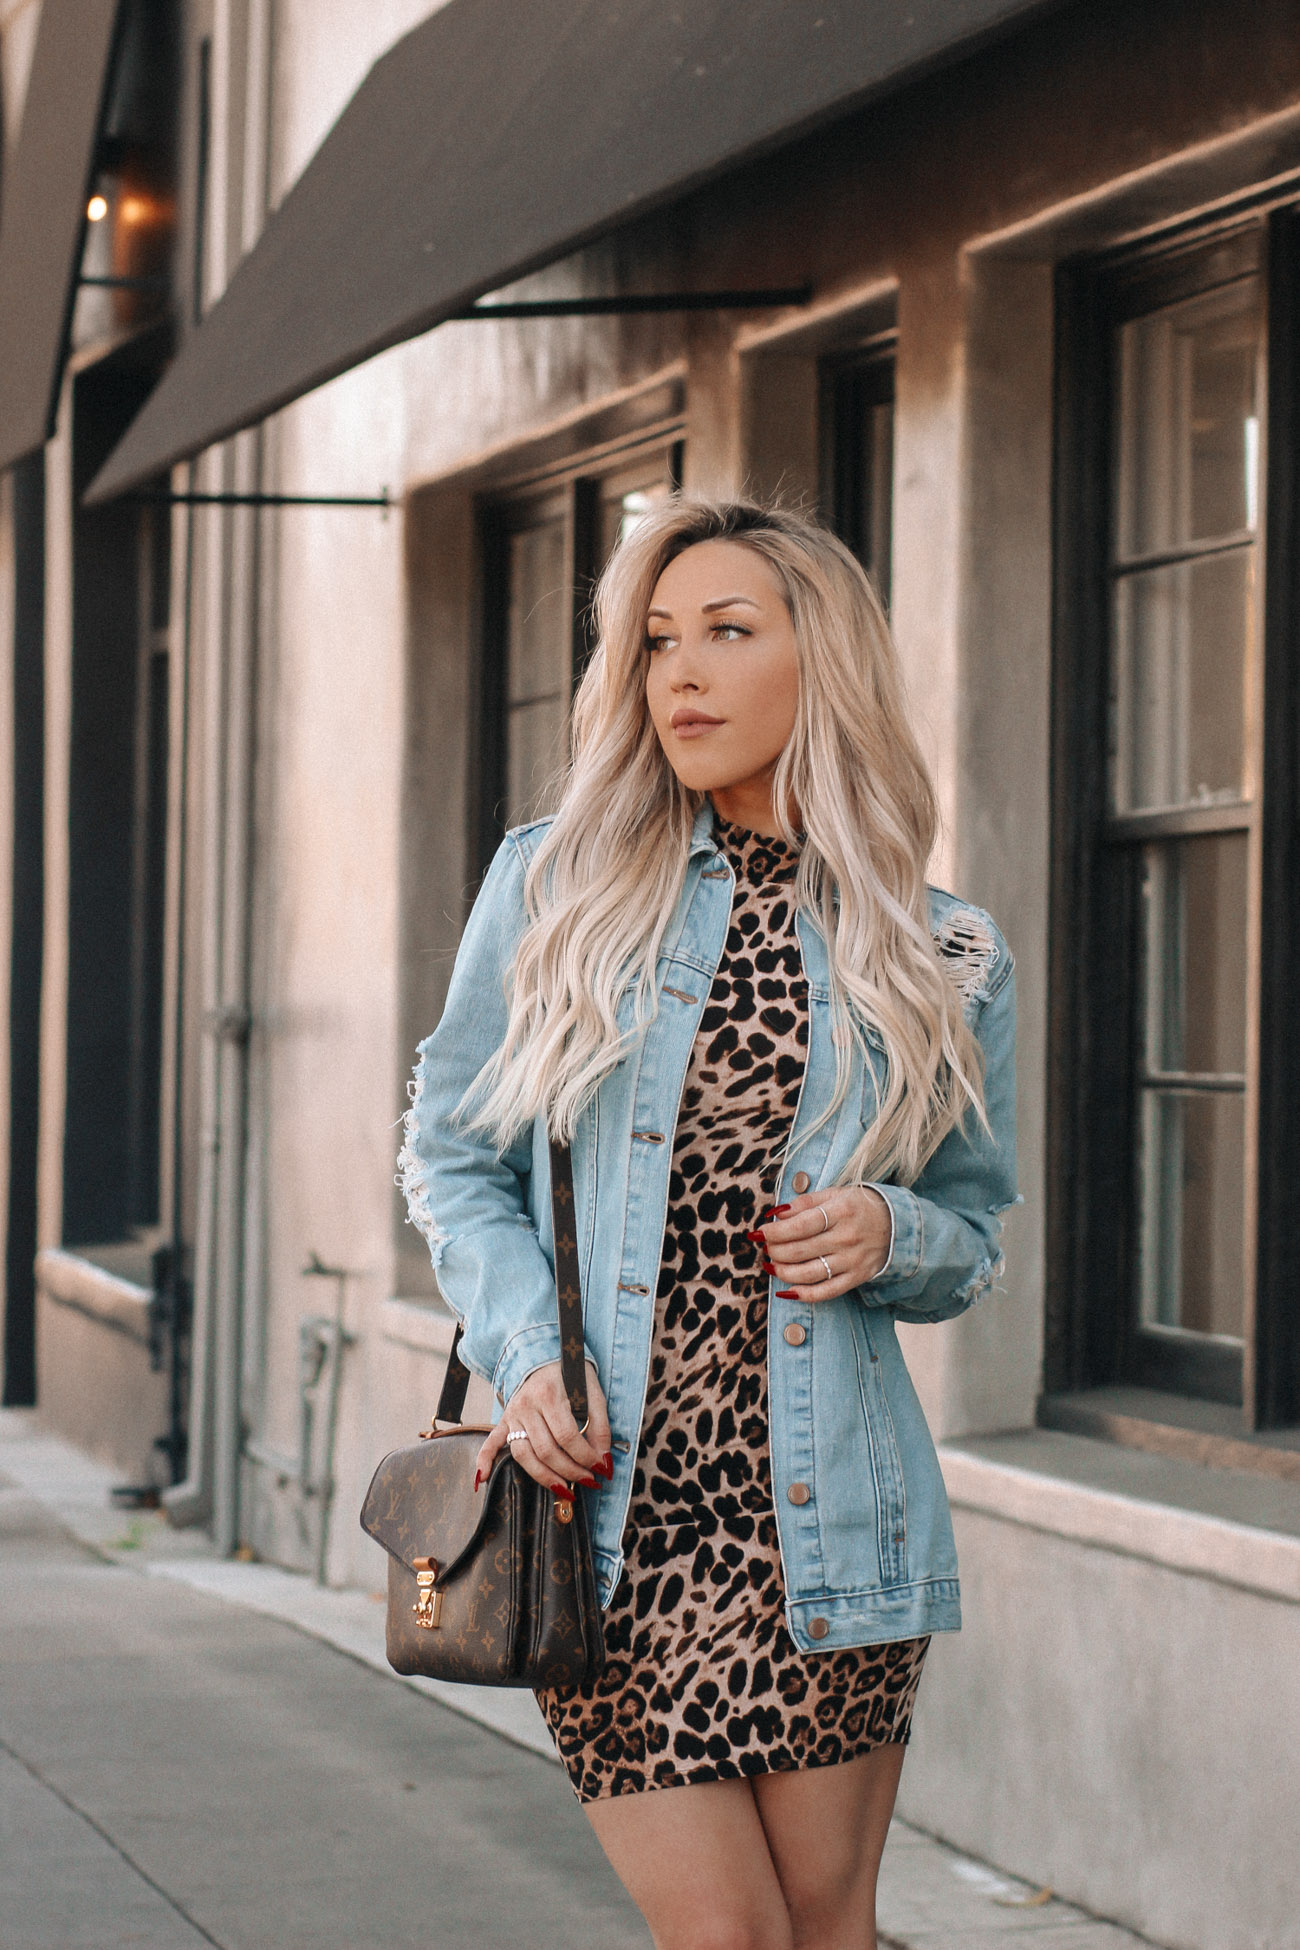 A Leopard Moment | Denim Jacket | Cheetah | Nude Louboutins | Beverly Hills | Blondie in the City by Hayley Larue